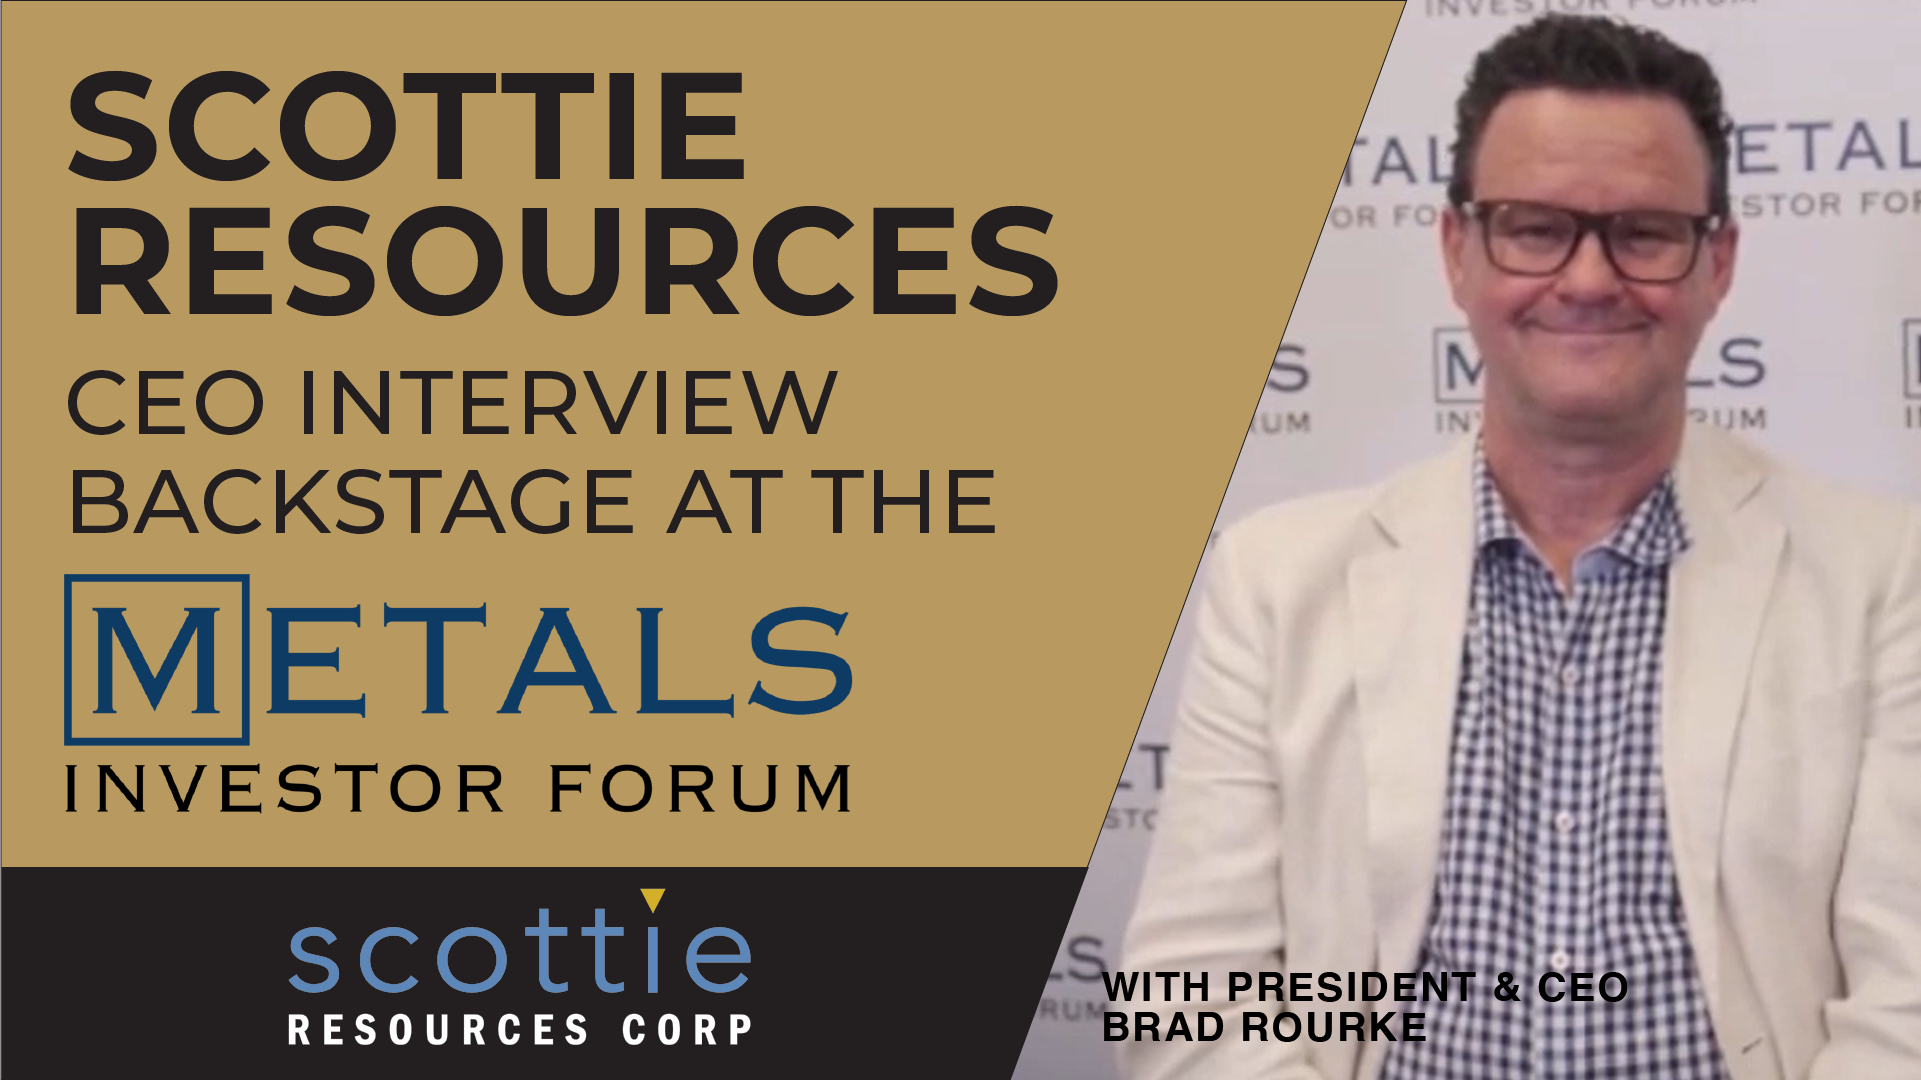 Backstage Interview with President and CEO Brad Rourke at the Metals Investor Forum, June11-12, 2022